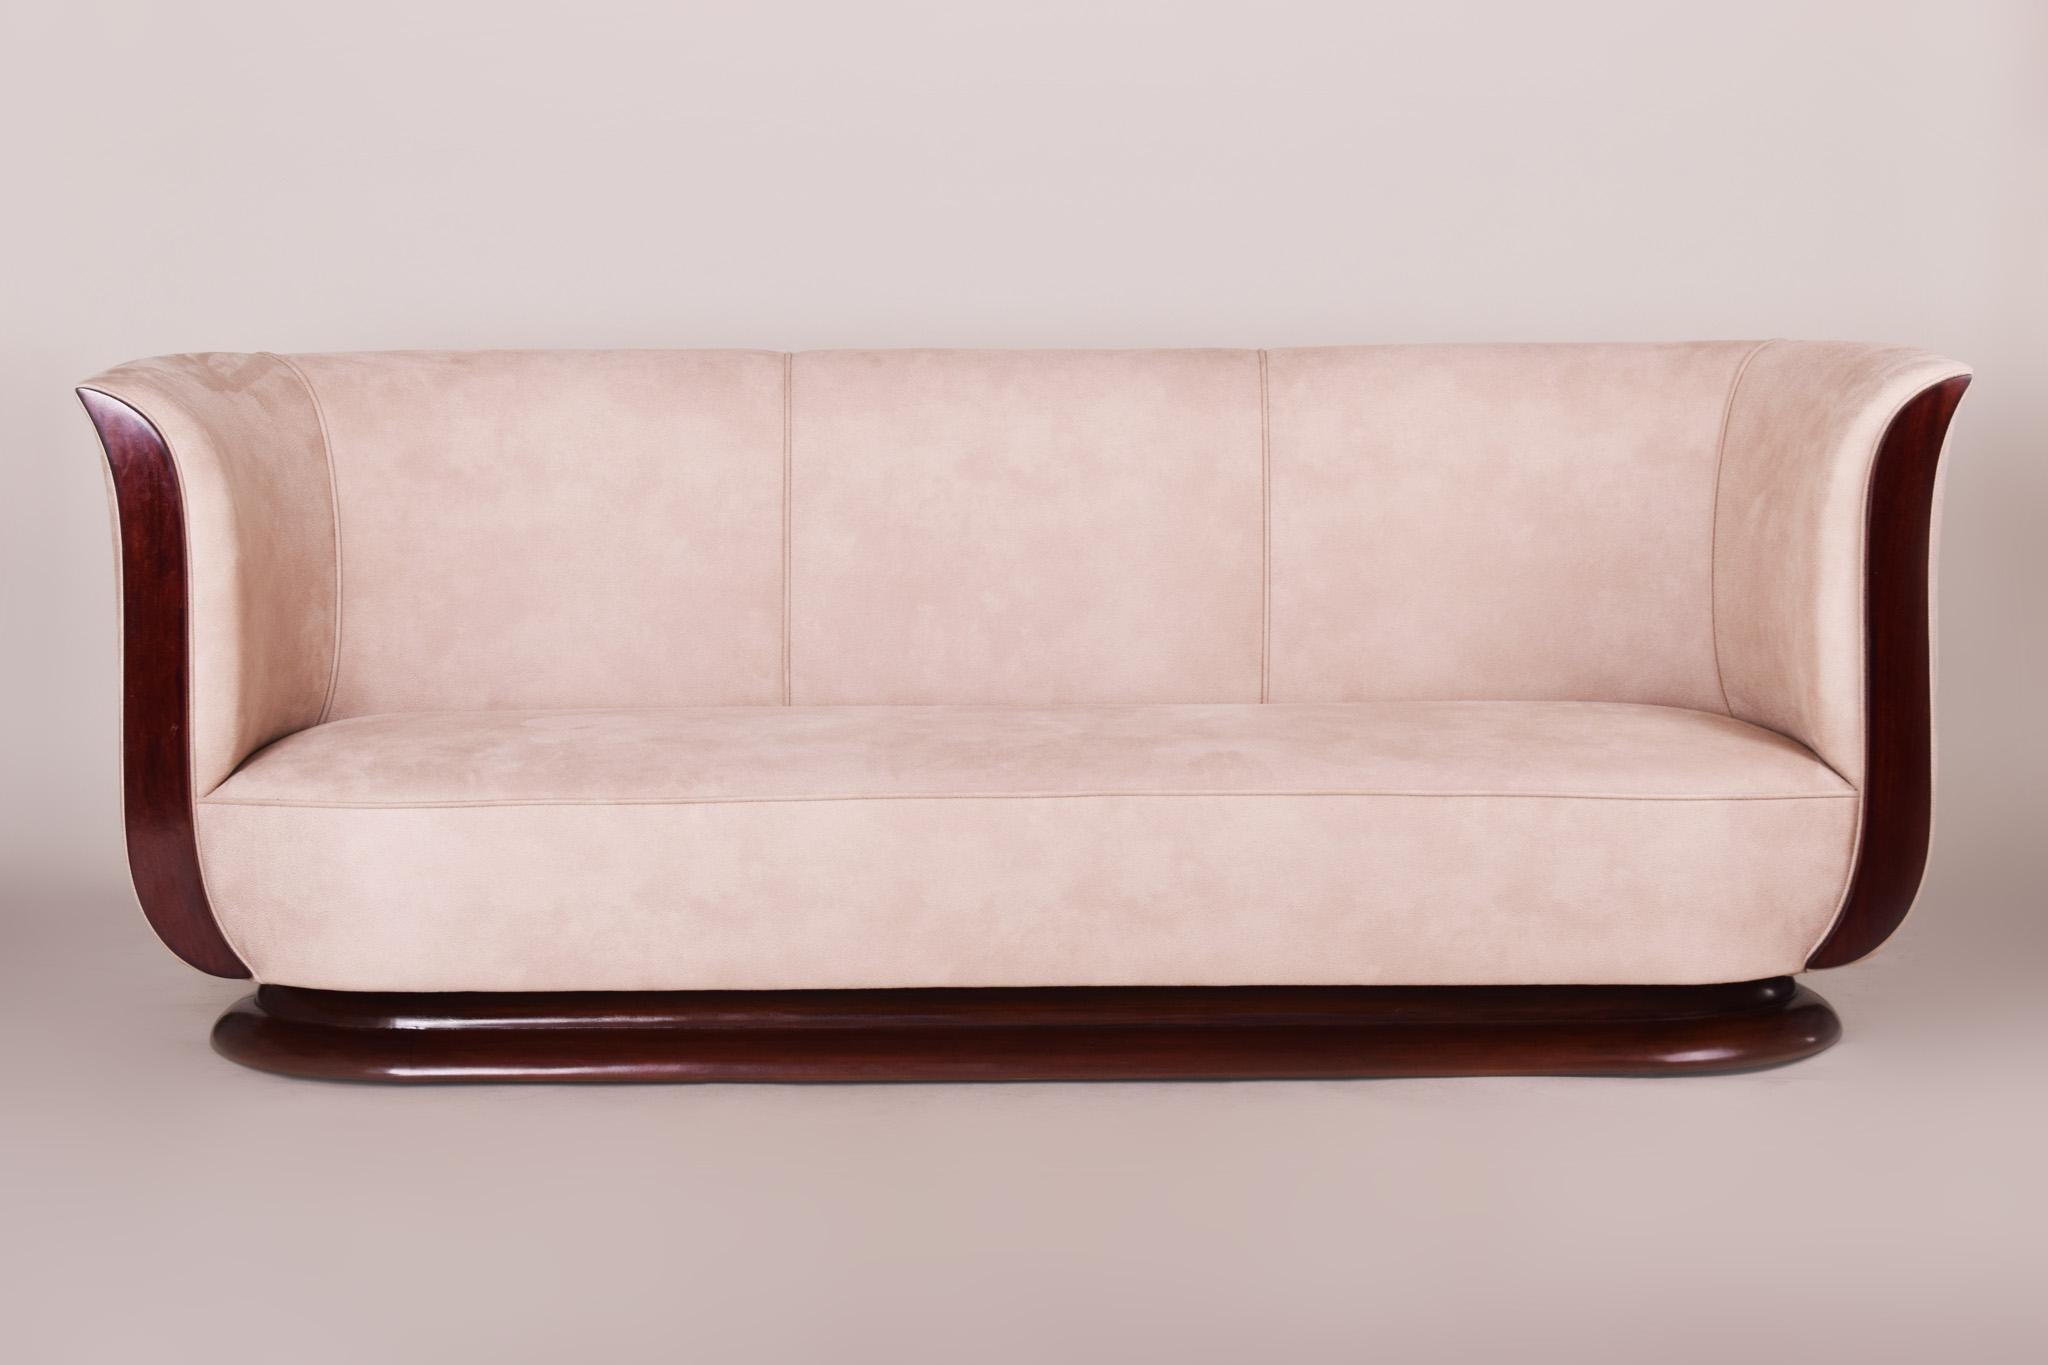 Inspired of architect Emile Jacques Ruhlmann

Art Deco Tulip sofa
Materiel: Mahogany
Completely restored, new upholstery included.
Source: France
Period: 1930-1939.
 